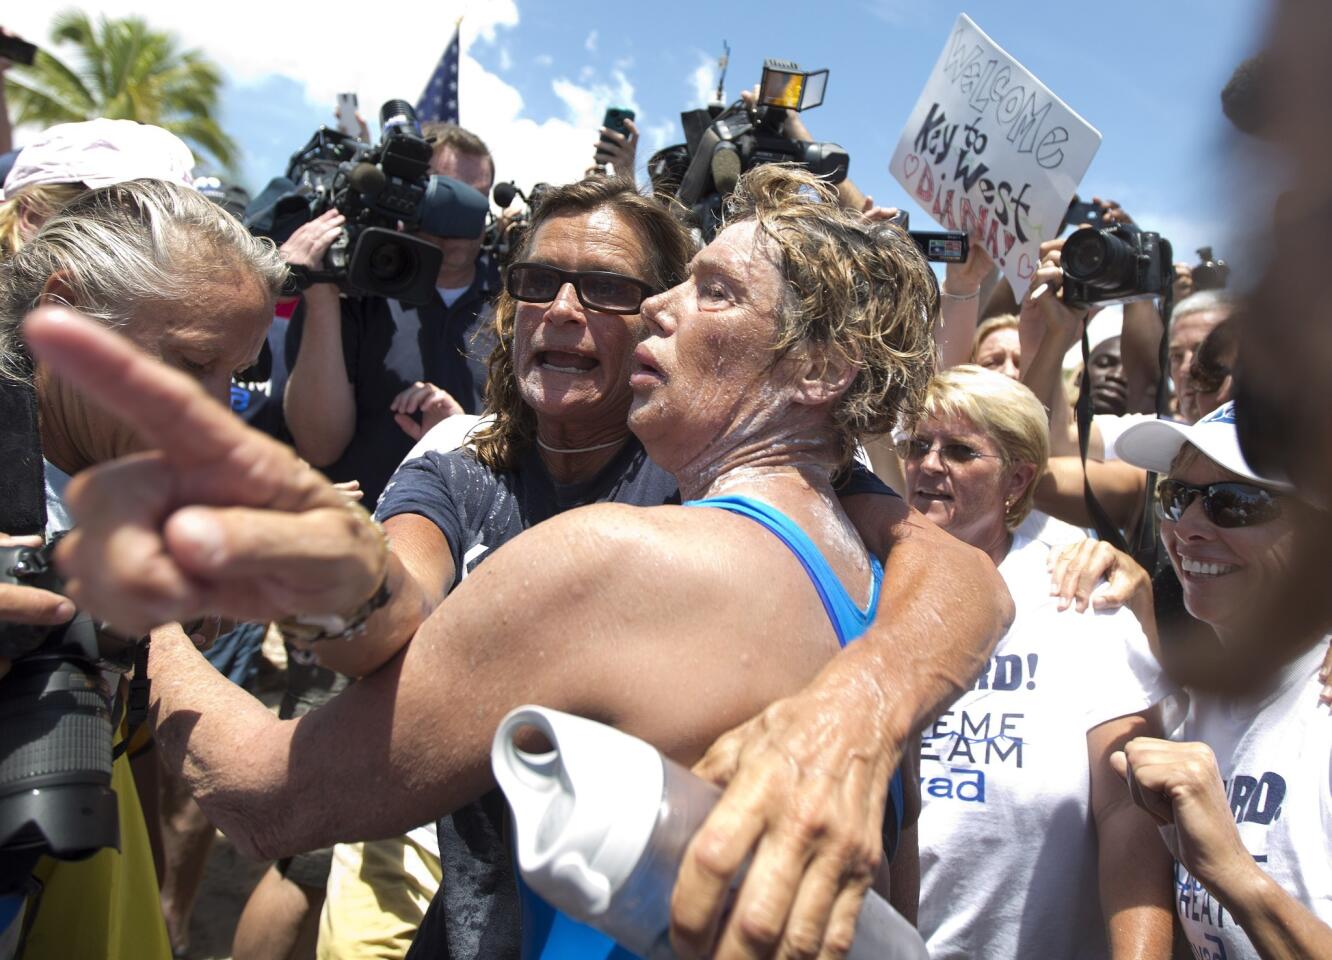 Endurance swimmer Diana Nyad, right, and her trainer Bonnie Stoll hug after Nyad walks ashore Monday in Key West, Fla., after swimming from Cuba. Nyad became the first person to swim from Cuba to Florida without the help of a shark cage.